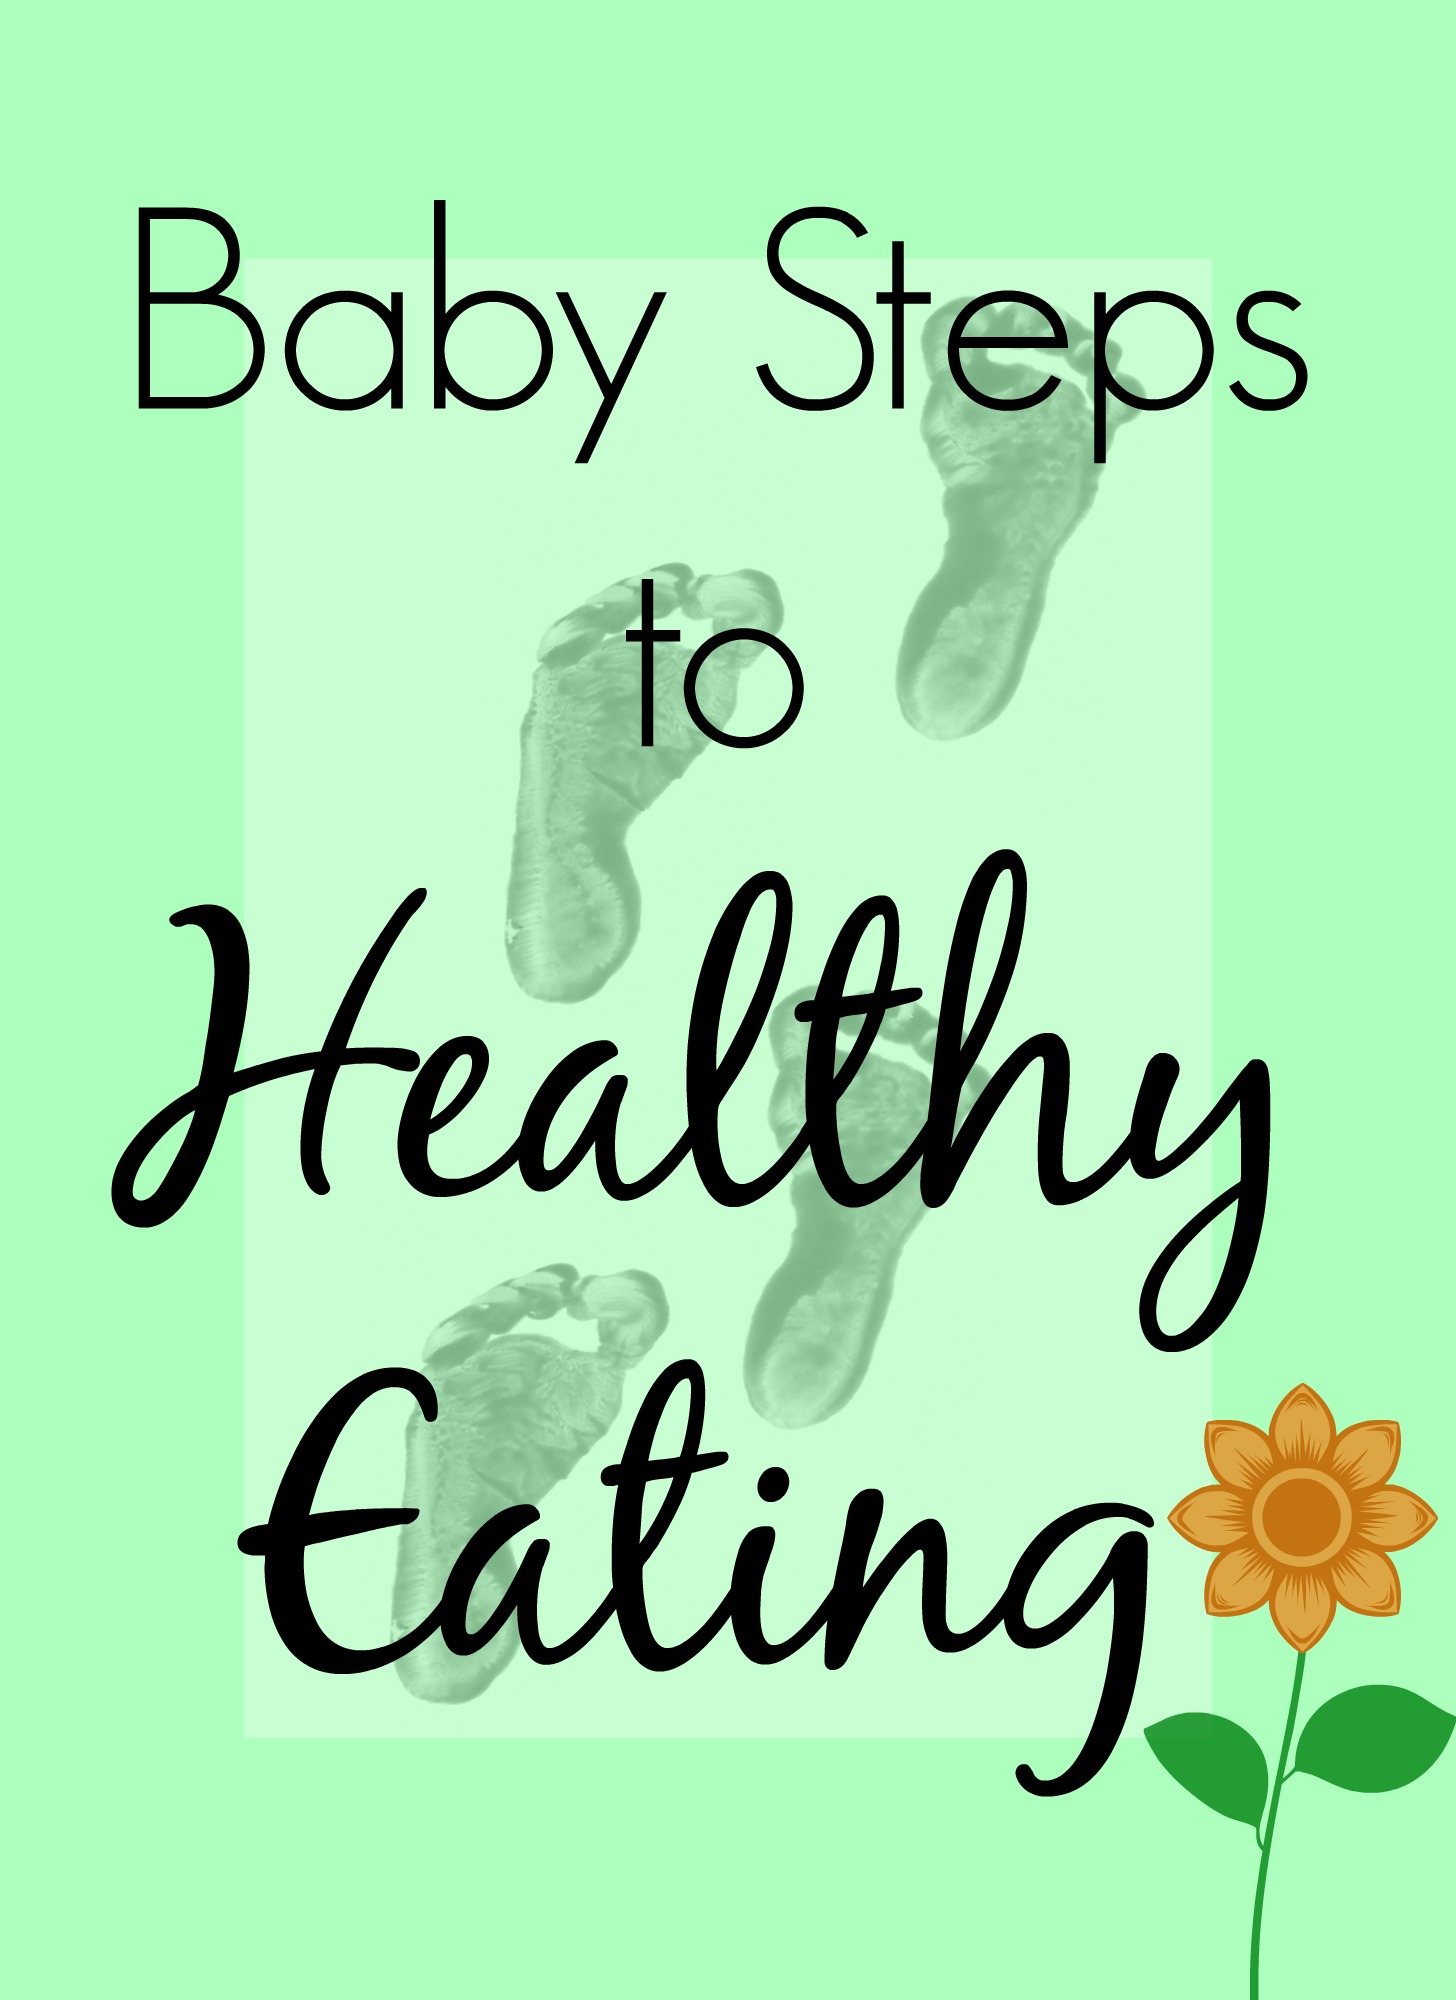 Baby Steps for Healthy Eating